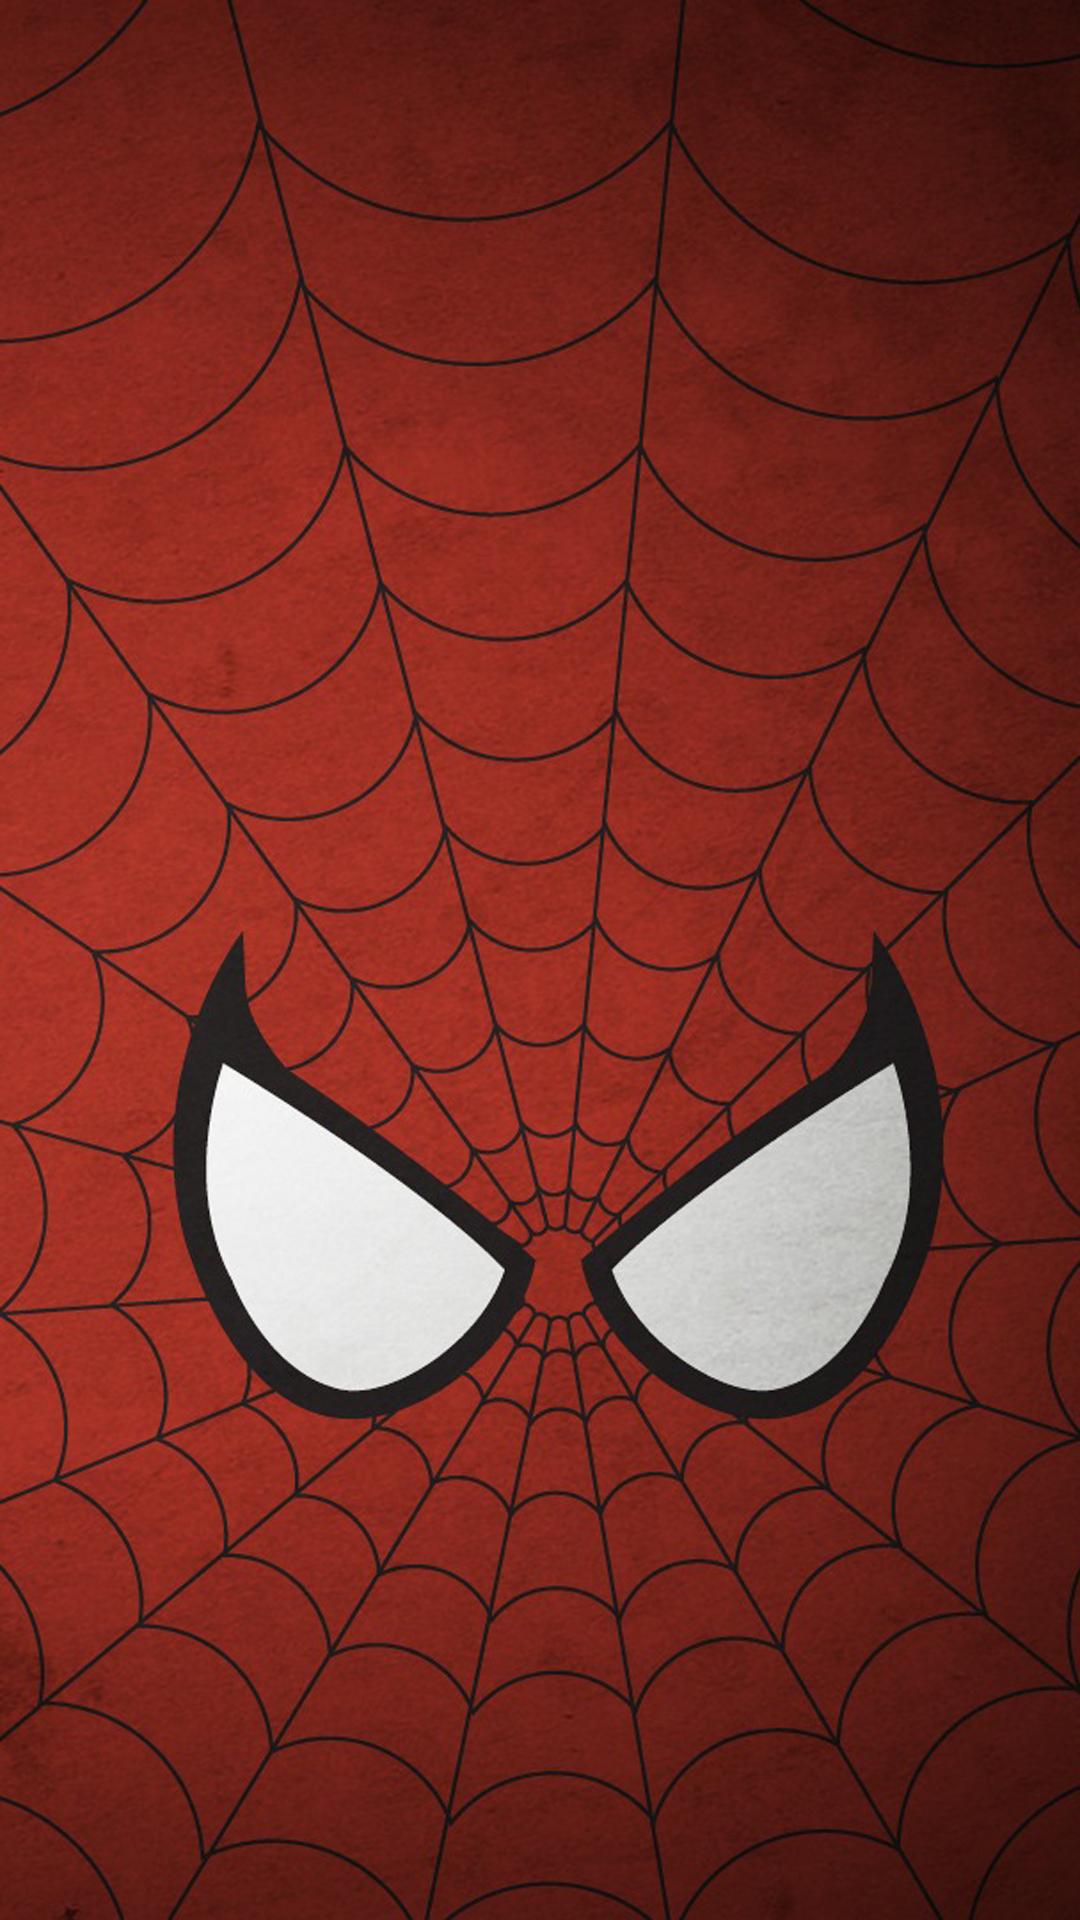 Spiderman Image for iPhone HD